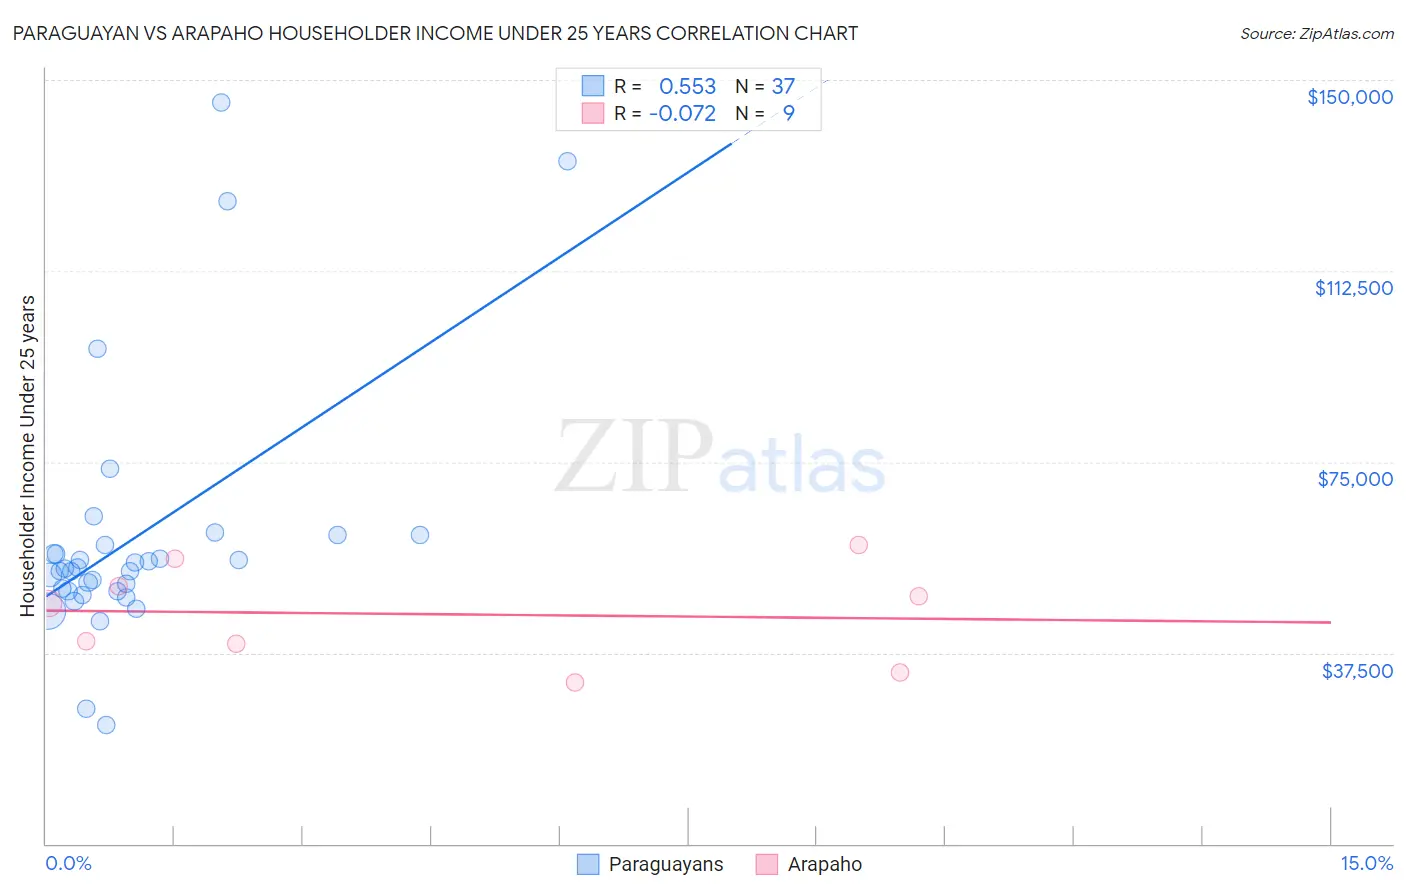 Paraguayan vs Arapaho Householder Income Under 25 years